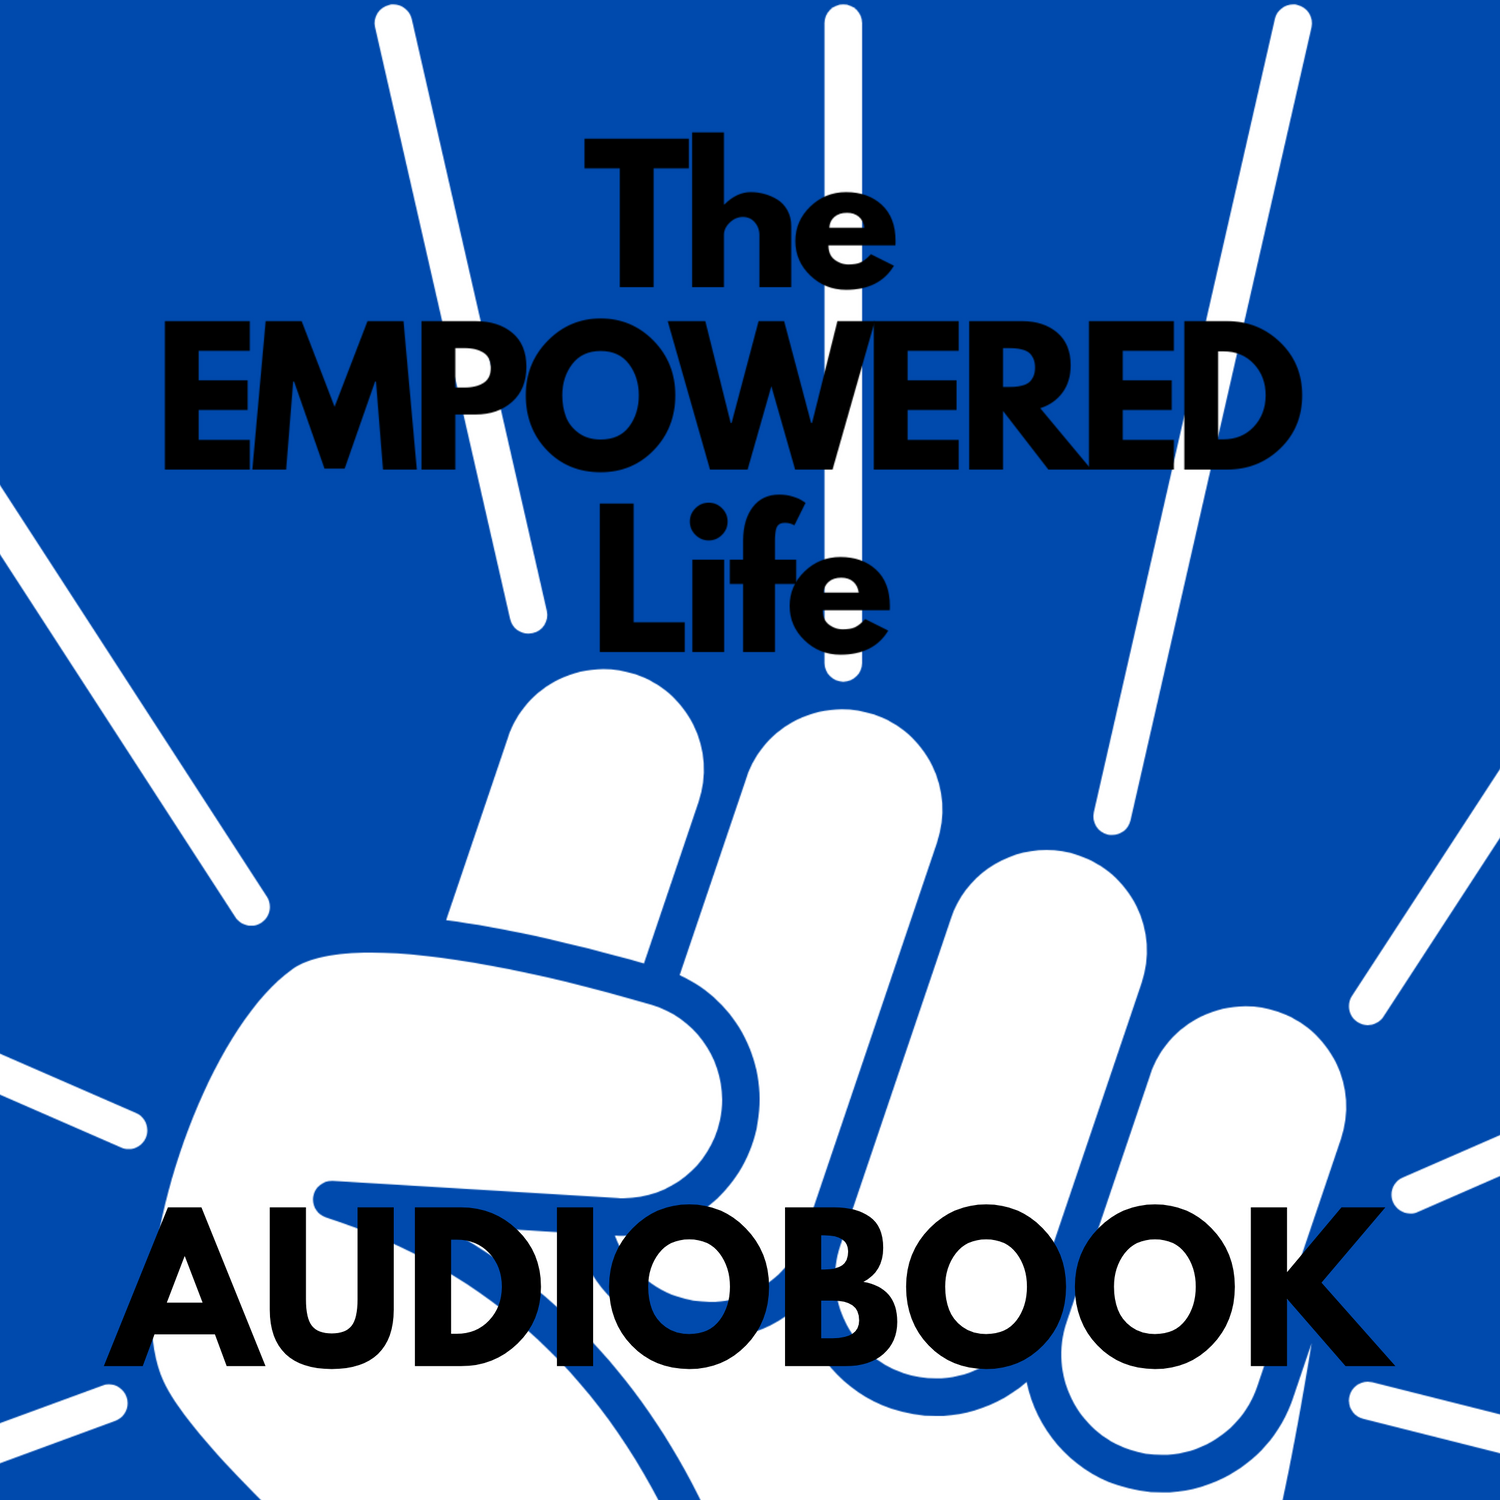 The Empowered Life: An Audiobook for Men - Download Delight